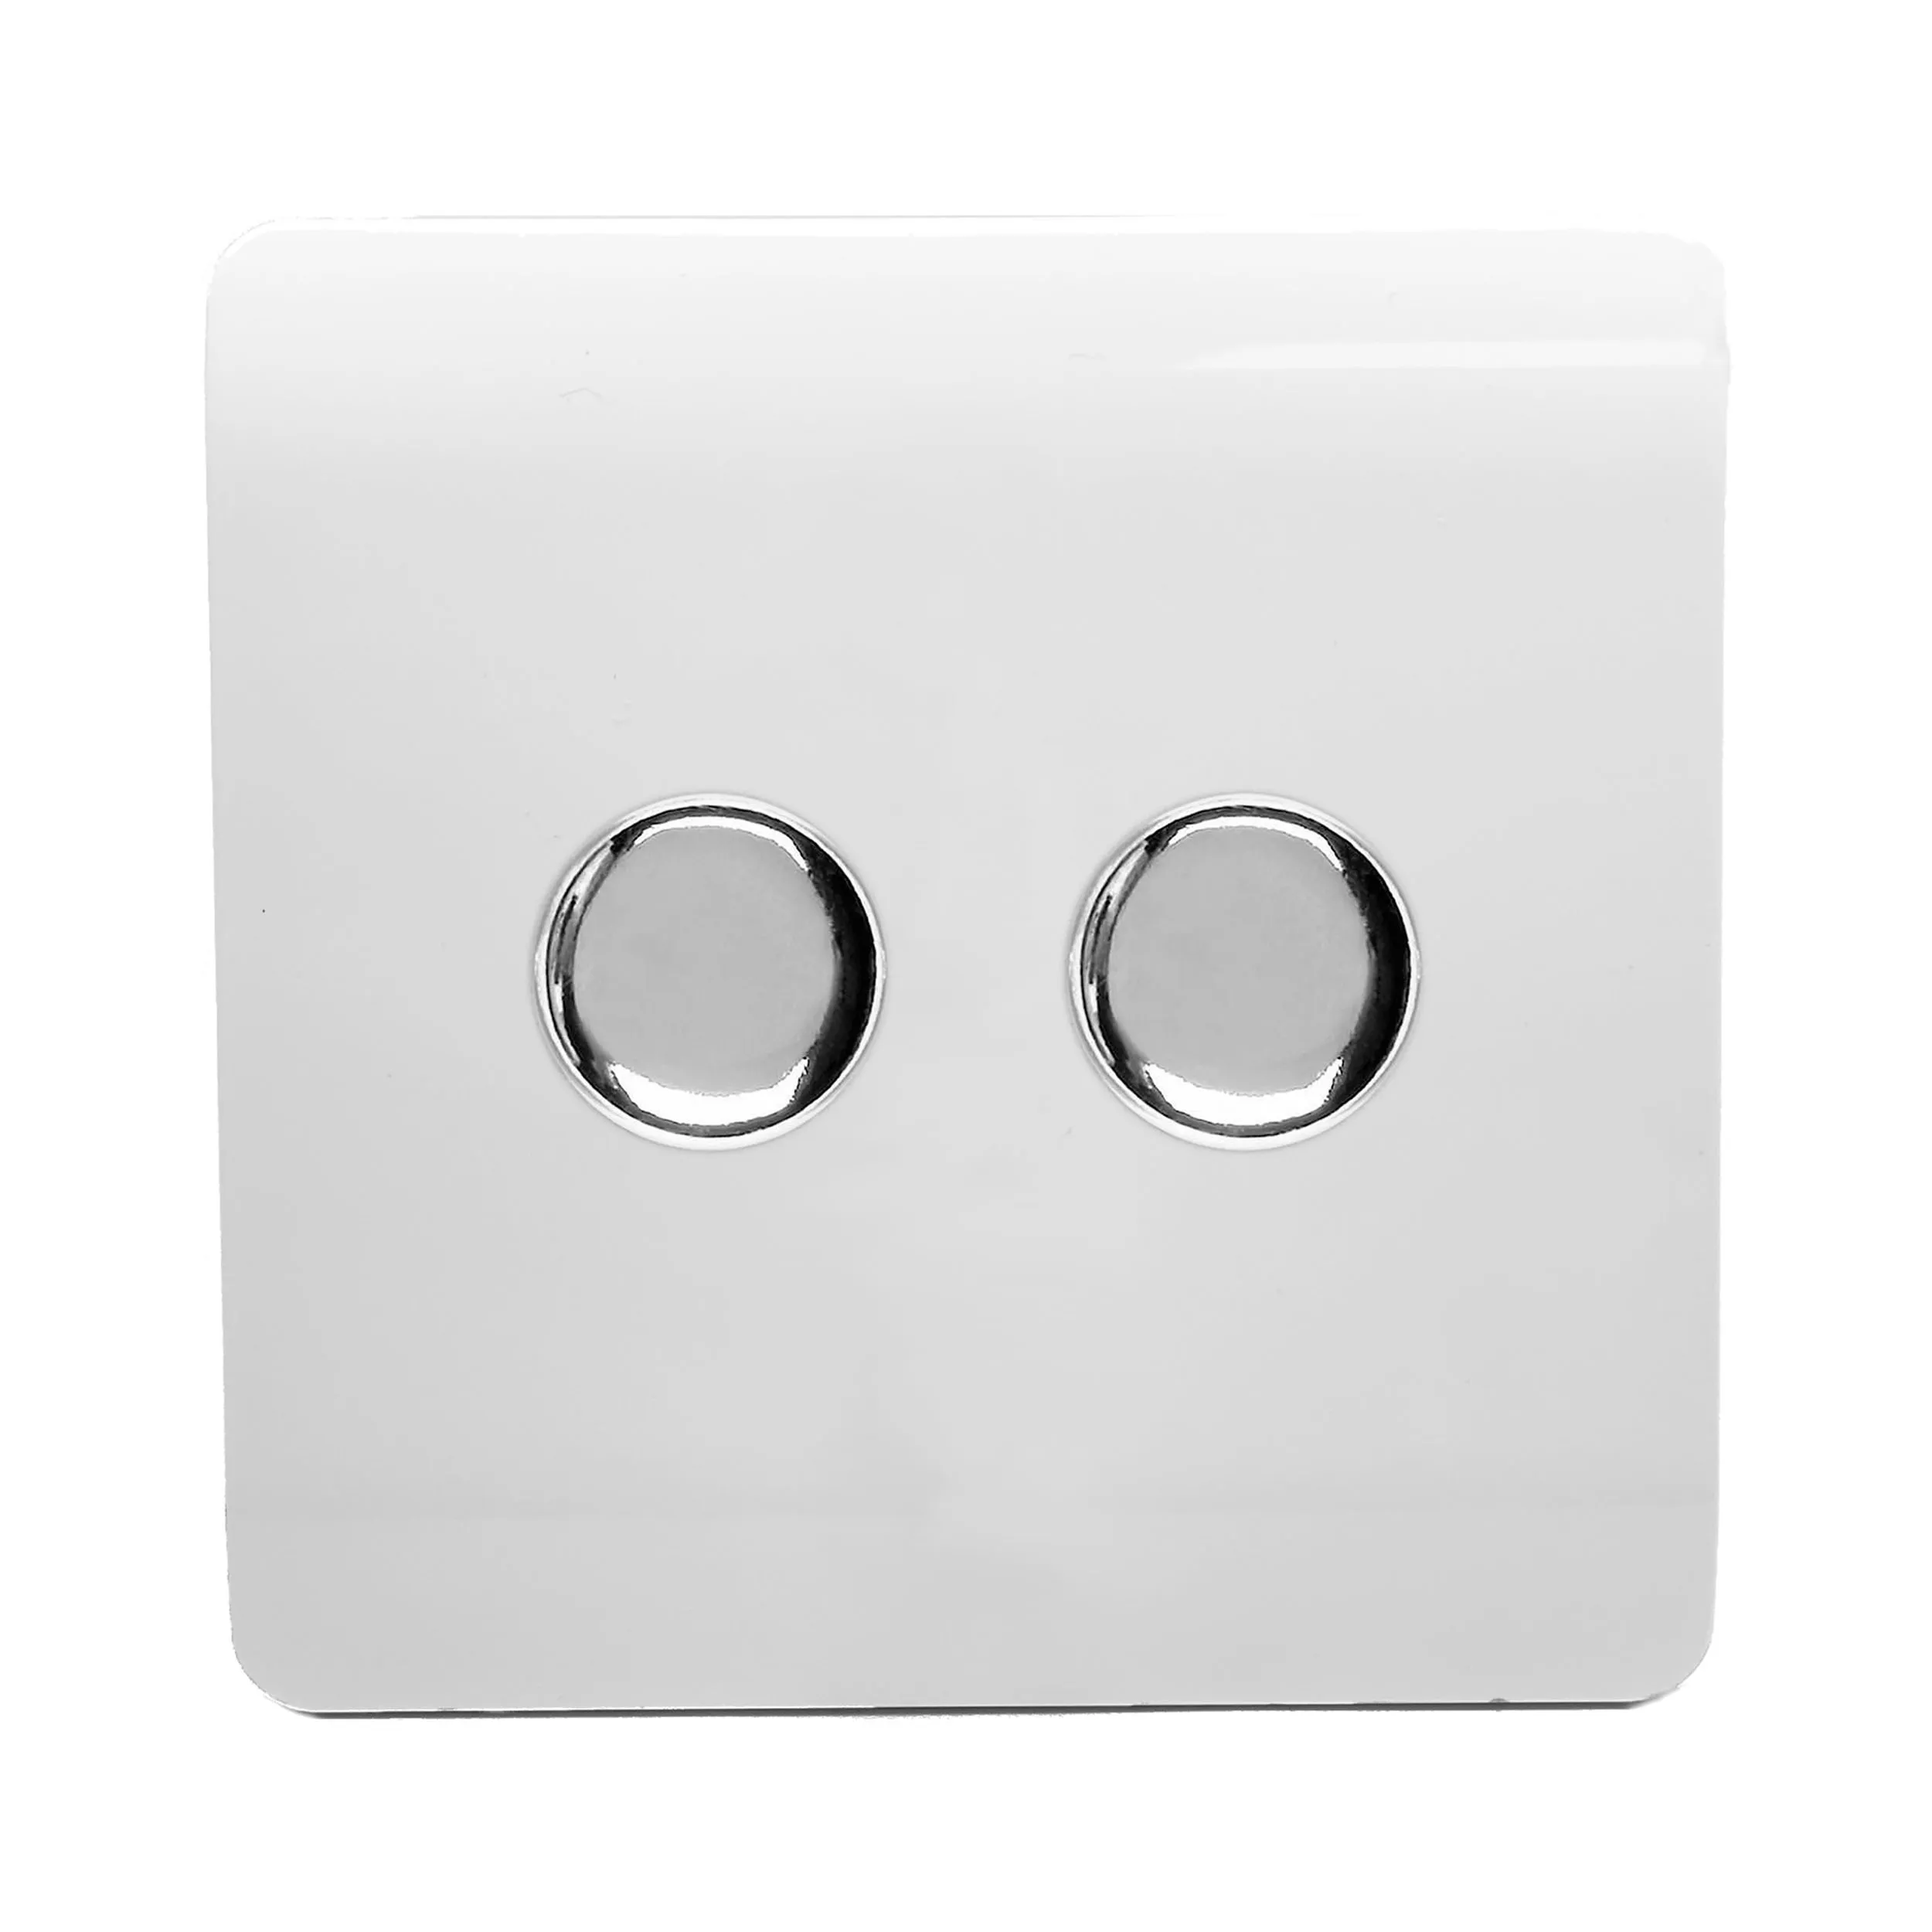 ART-2LDMWH  2 Gang 2 Way LED Dimmer Switch Ice White